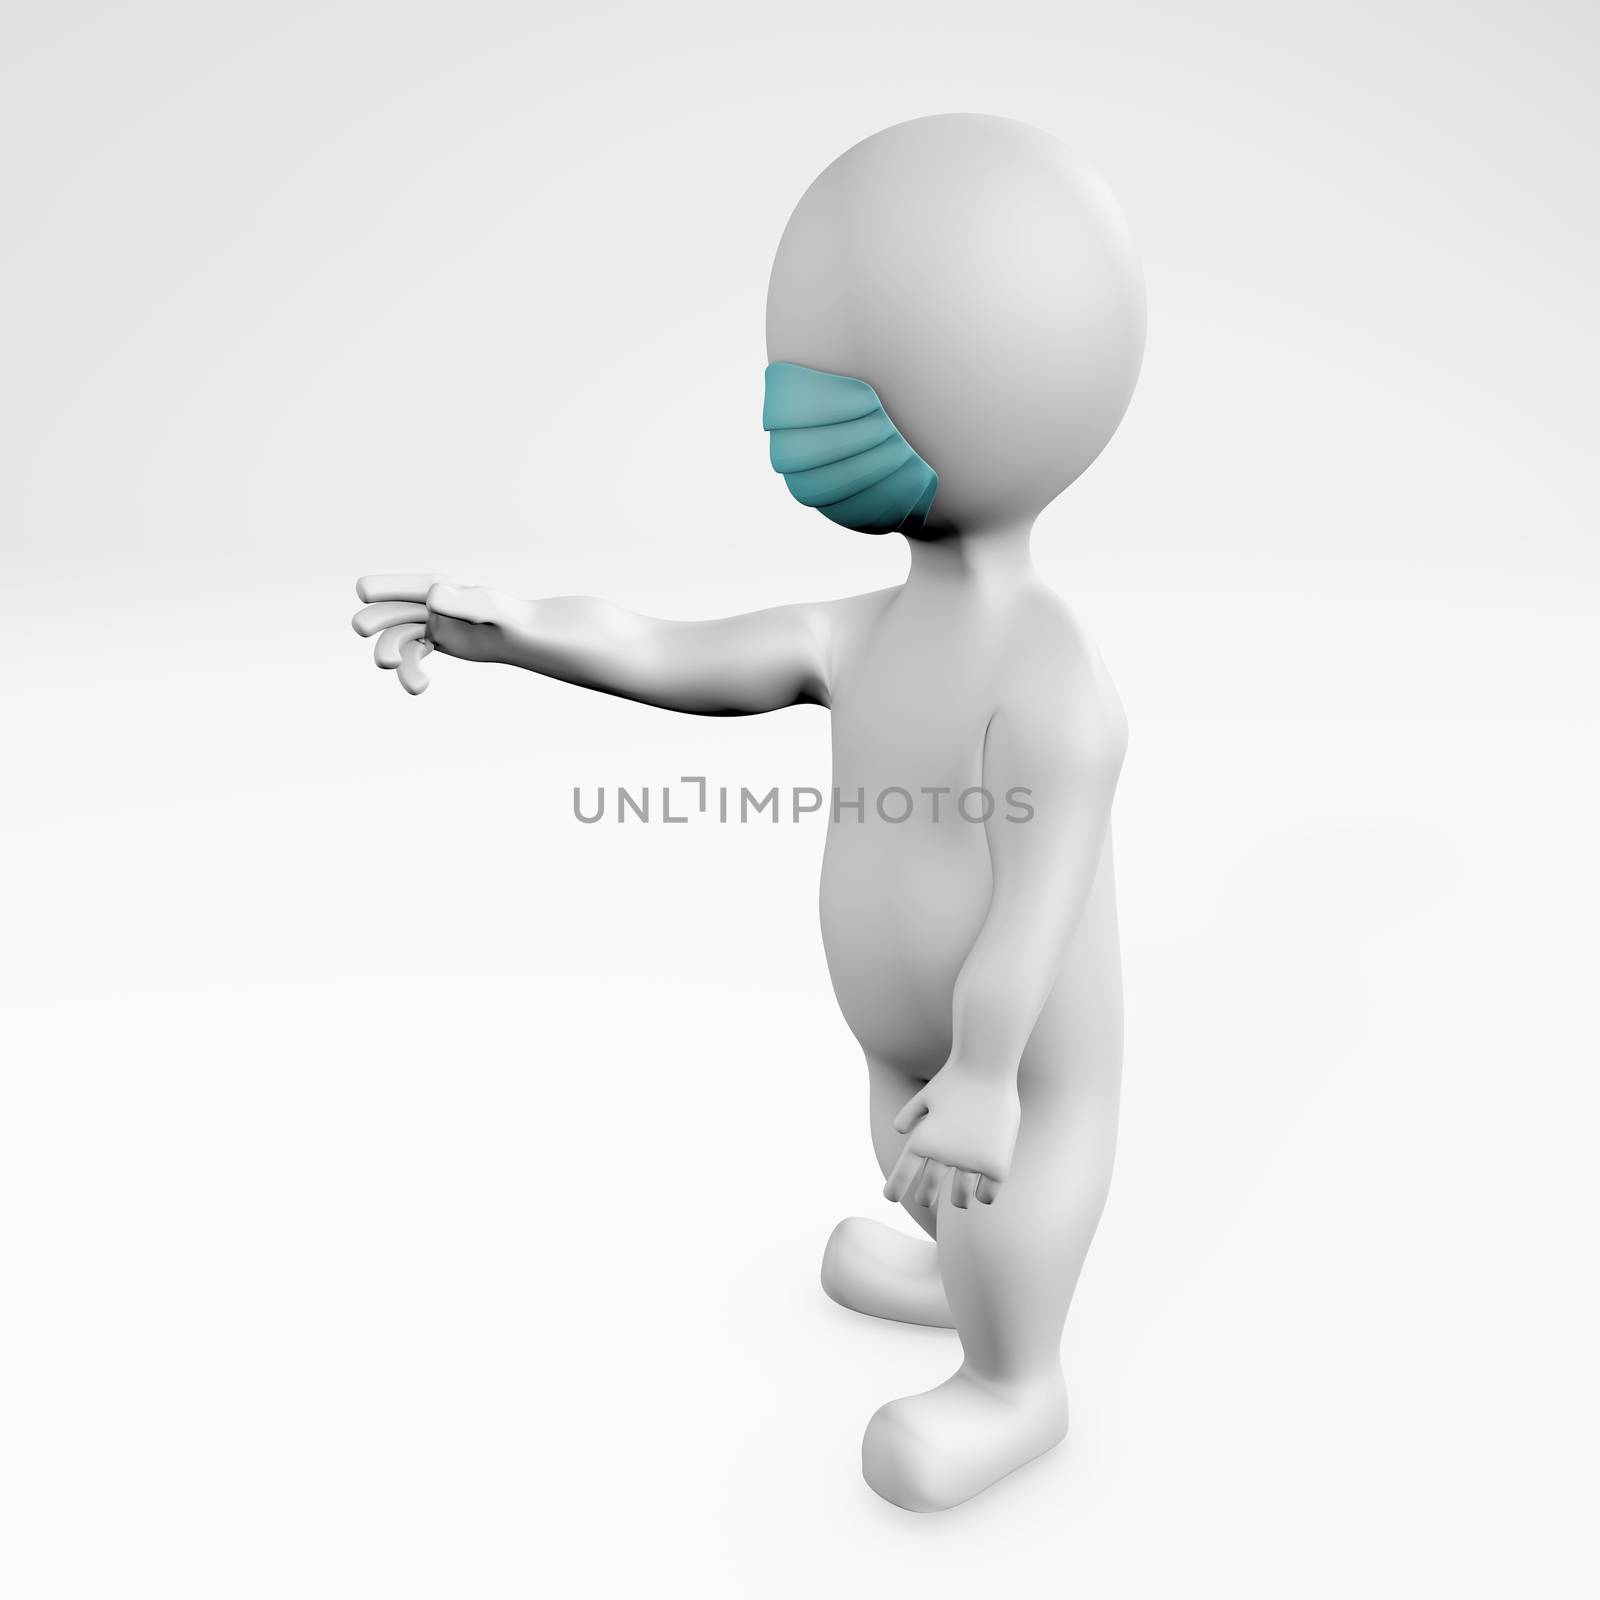 fatty man in quarantine wearing a medical mask reaching out 3d rendering